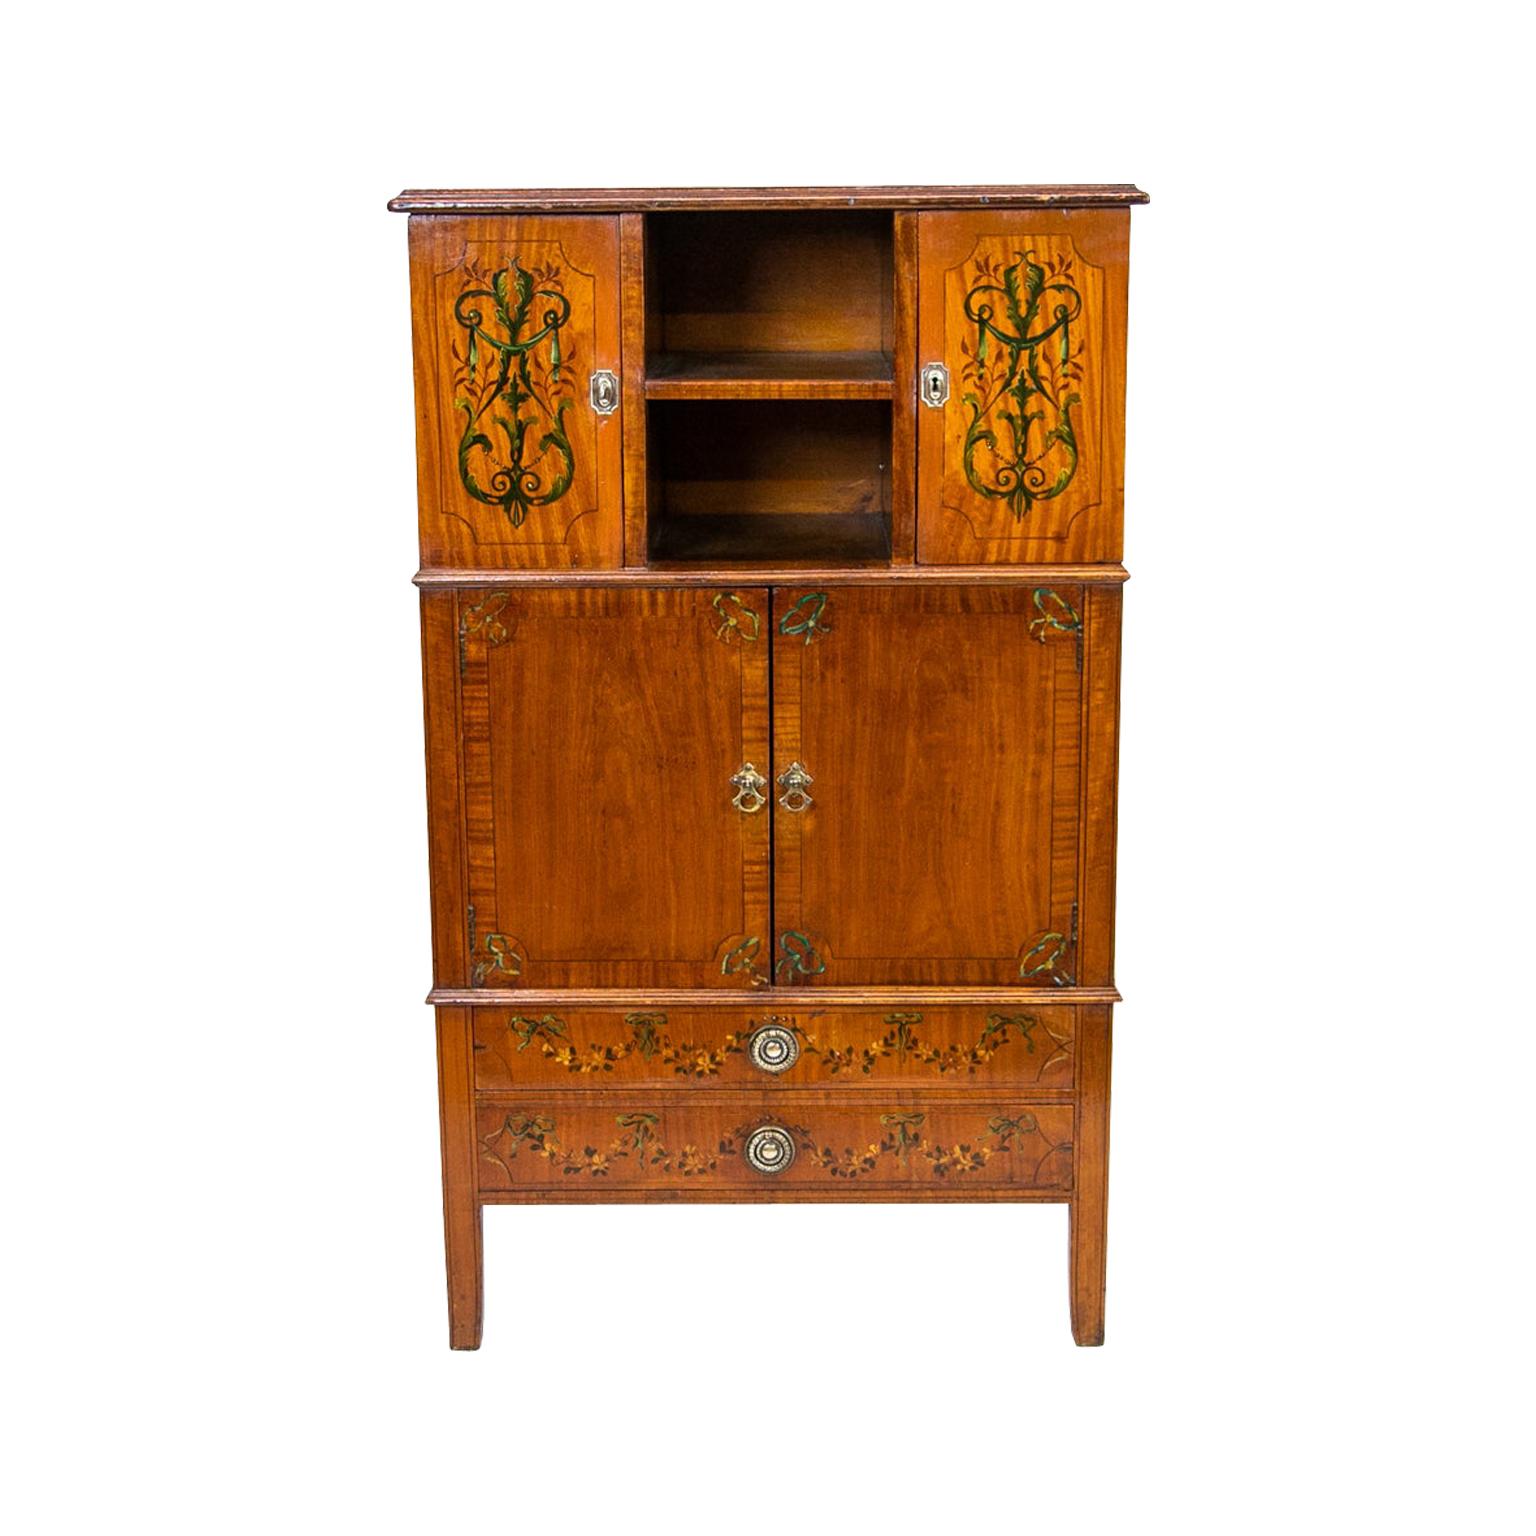 English Floral Painted Satinwood Cabinet